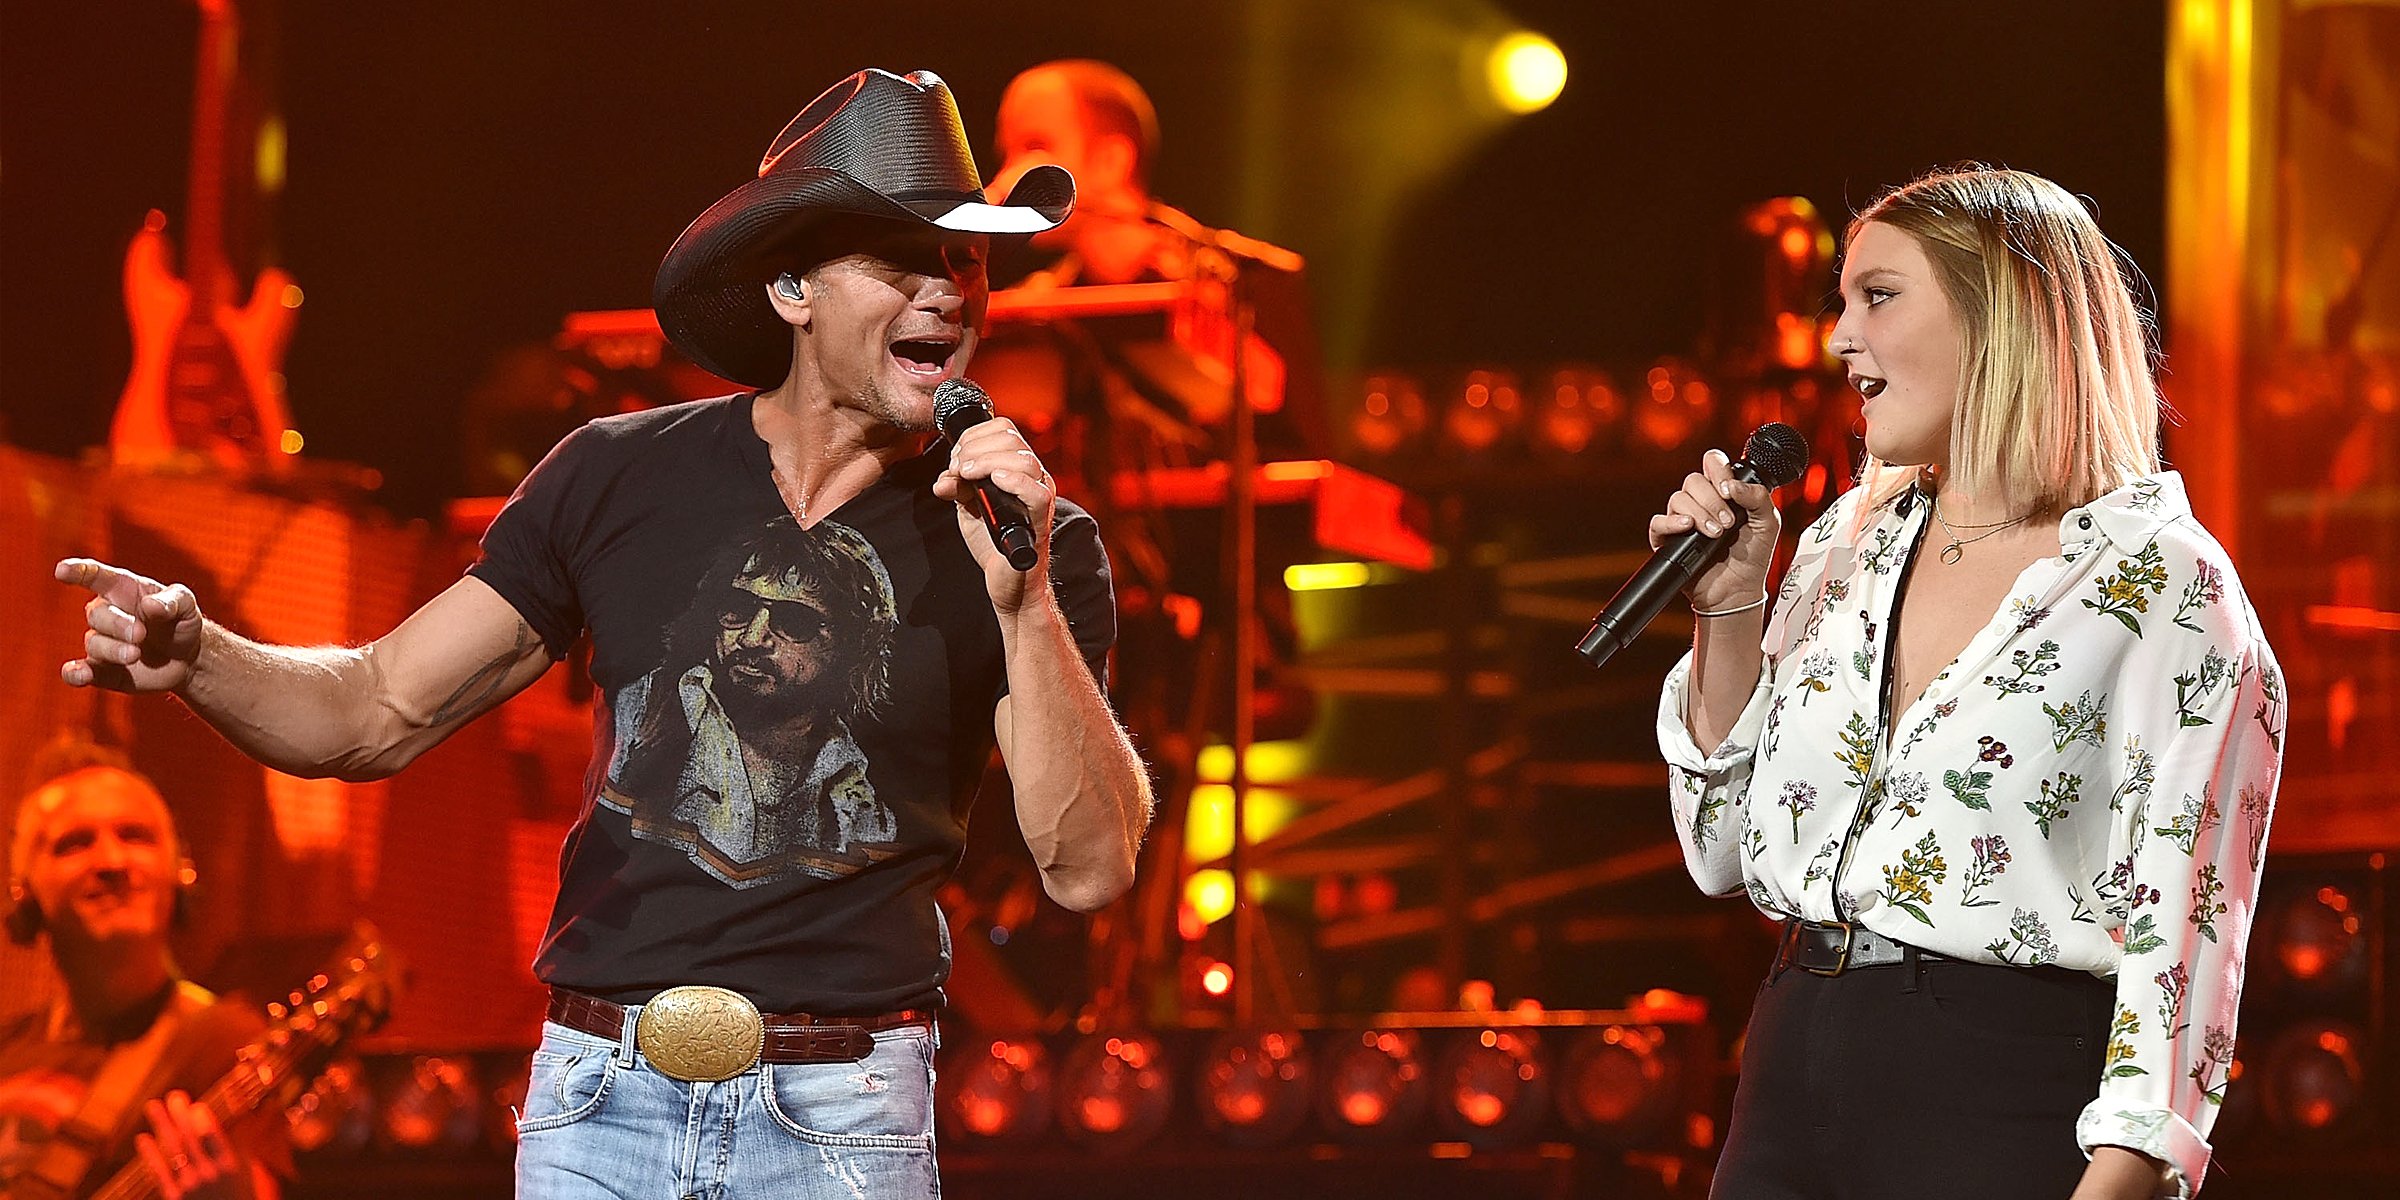 Gracie McGraw performing with her dad Tim McGraw | Source: Getty Images 